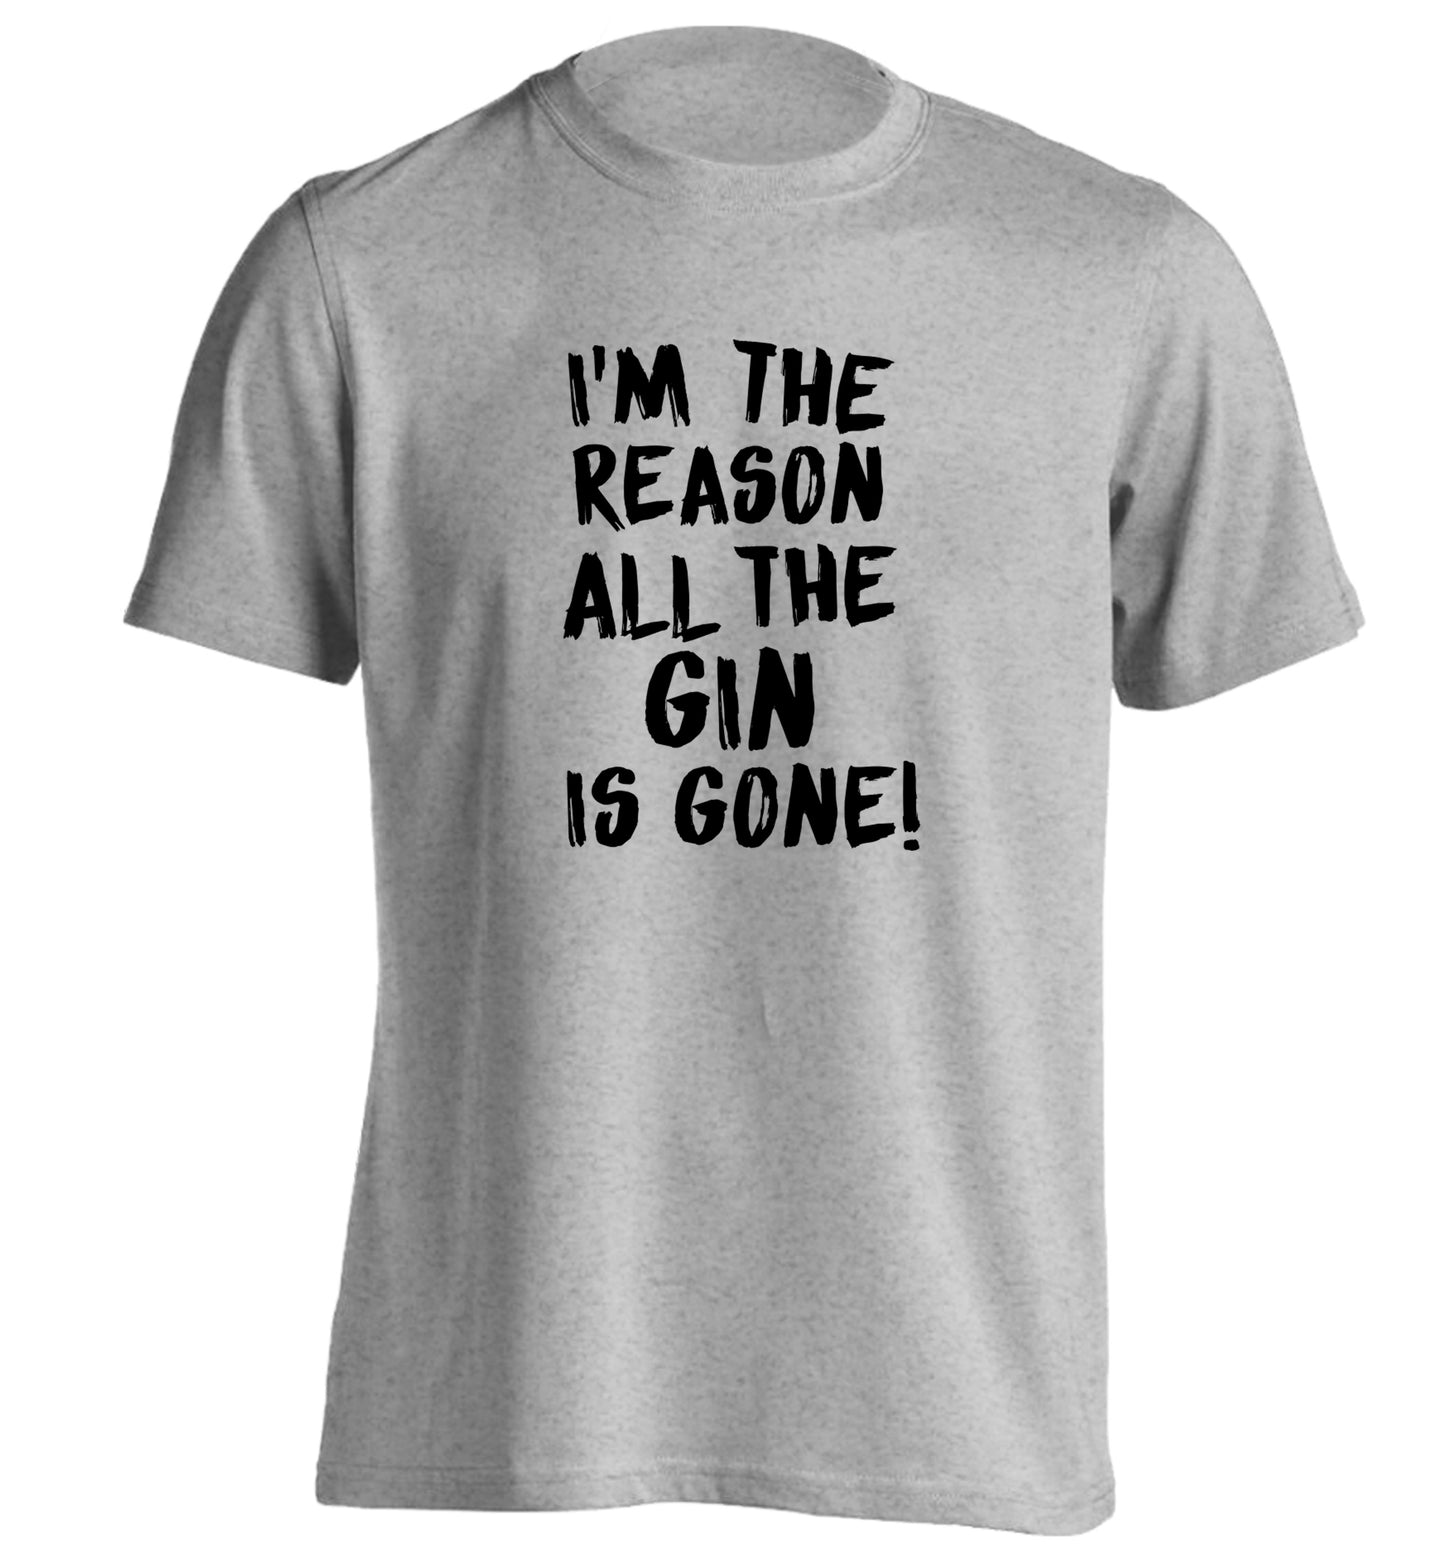 I'm the reason all the gin is gone adults unisex grey Tshirt 2XL